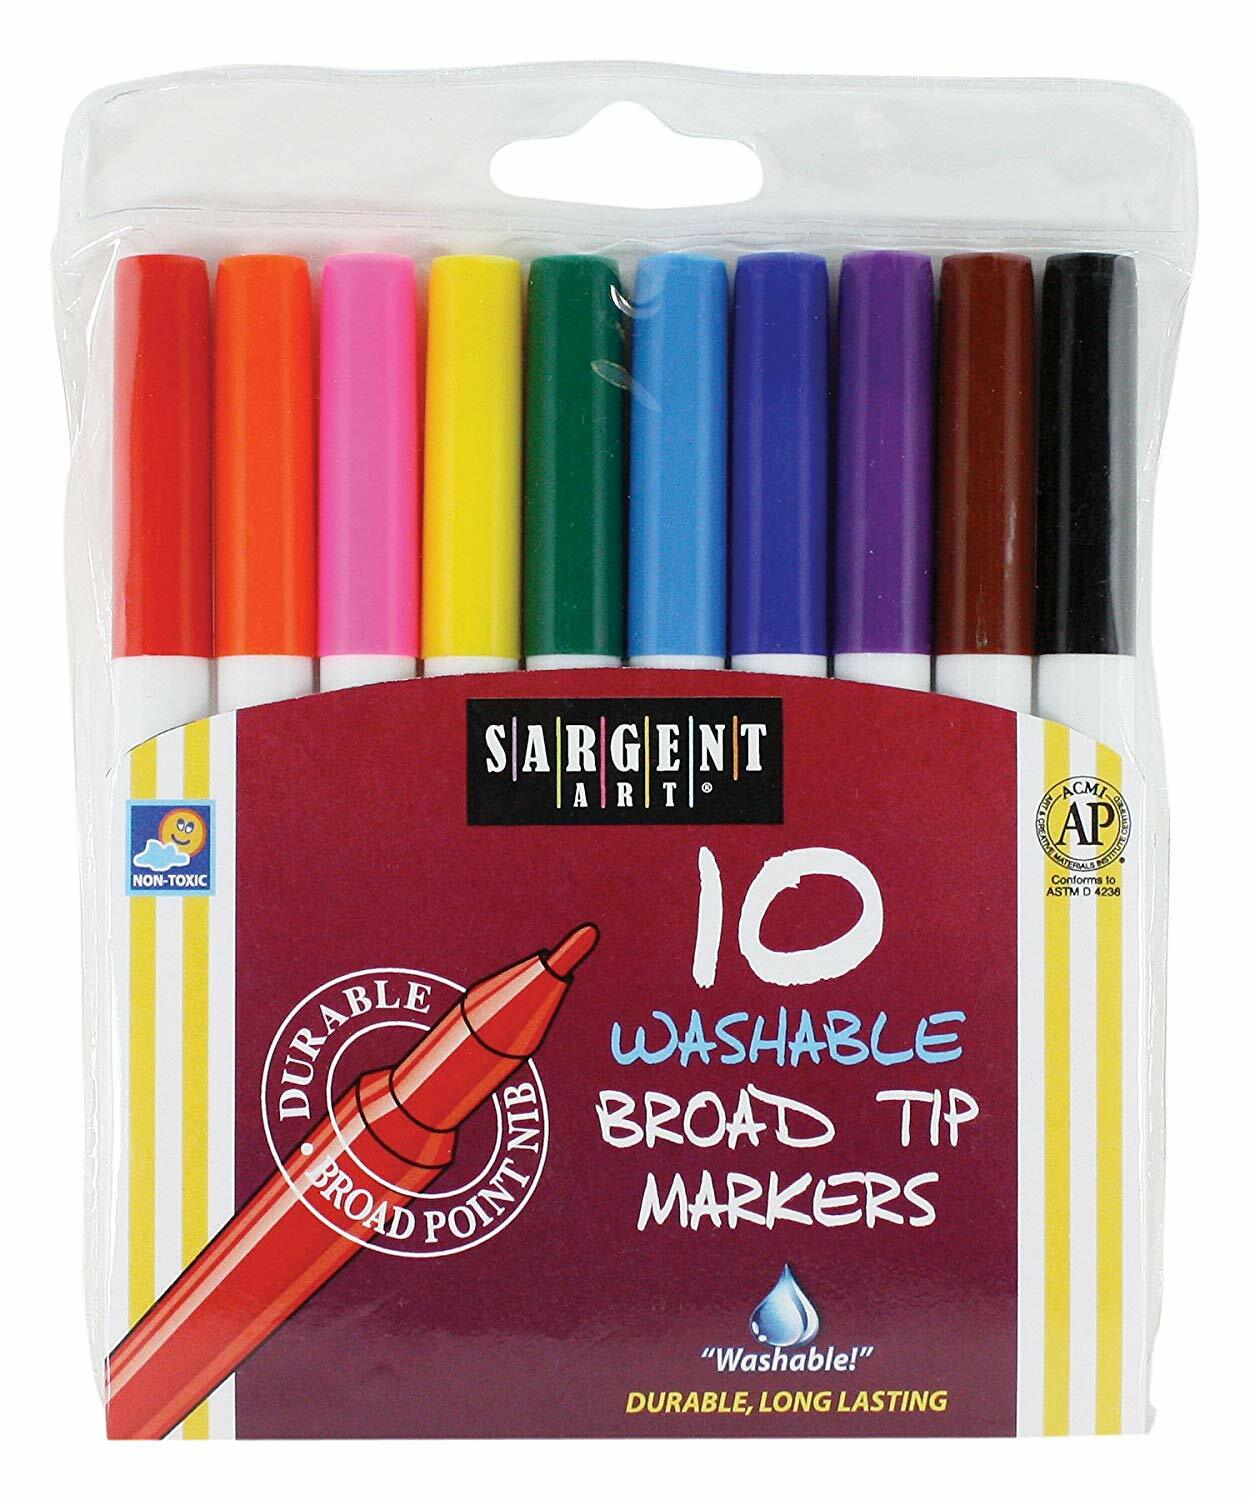 10-Count Washable Bullet Tip Broad Markers in a Pouch